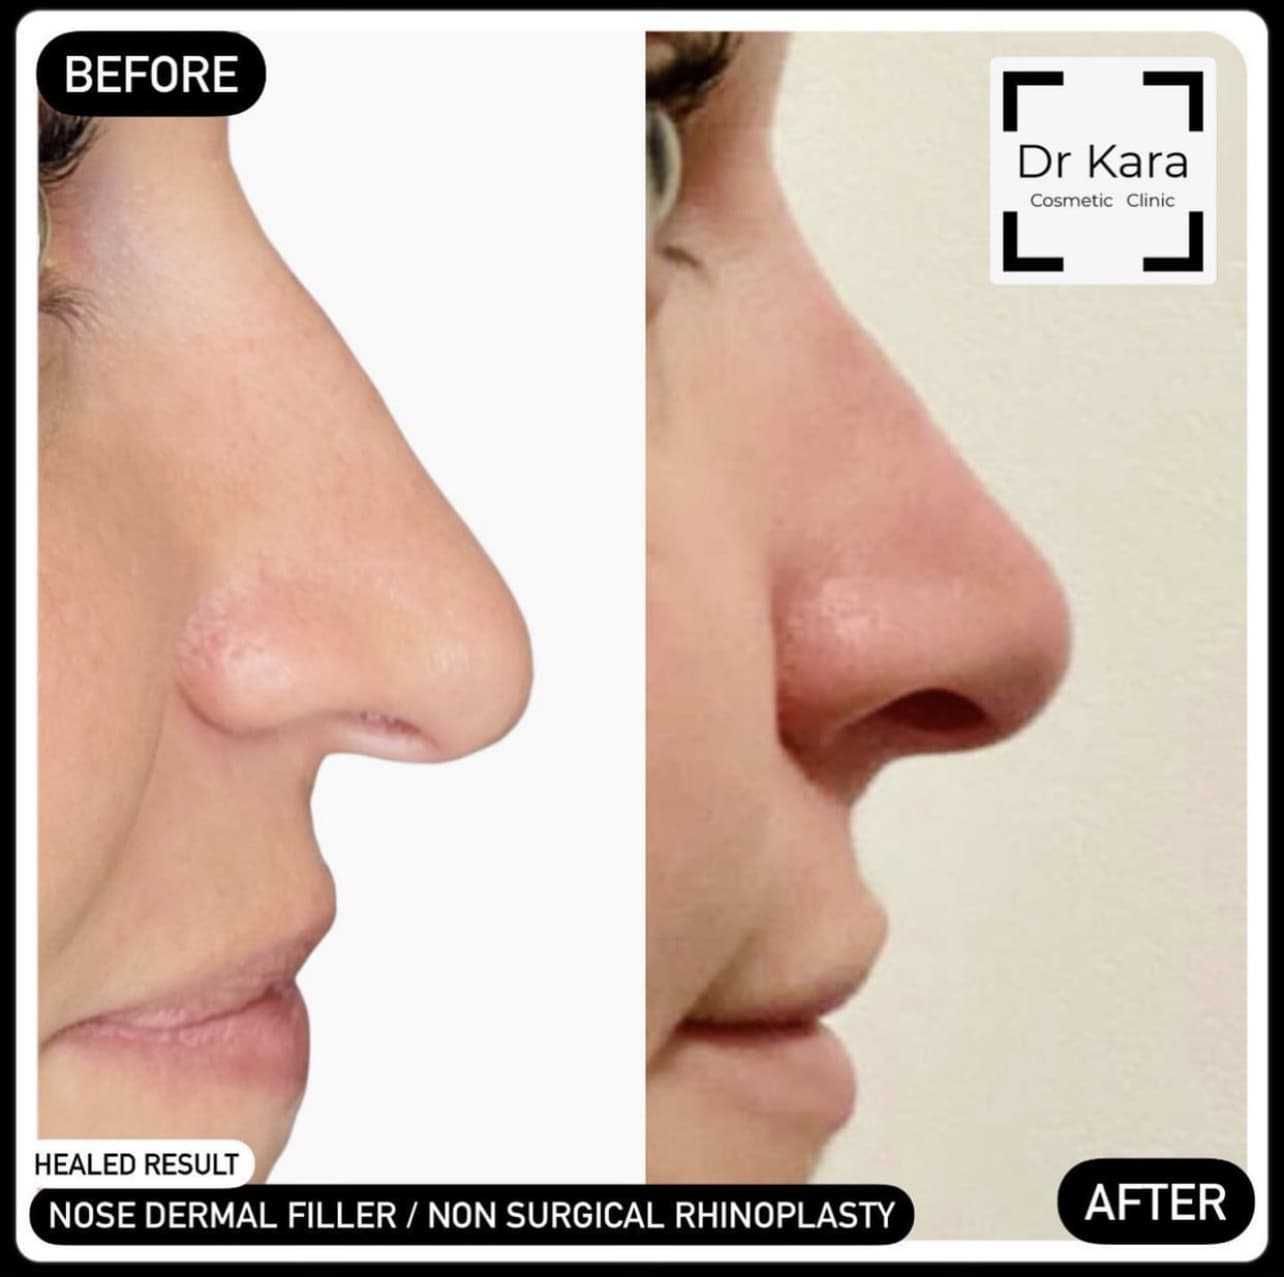 Non surgical rhinoplasty / nose dermal filler by Dr Kara Cosmetic Clinic , Norwich , Norfolk